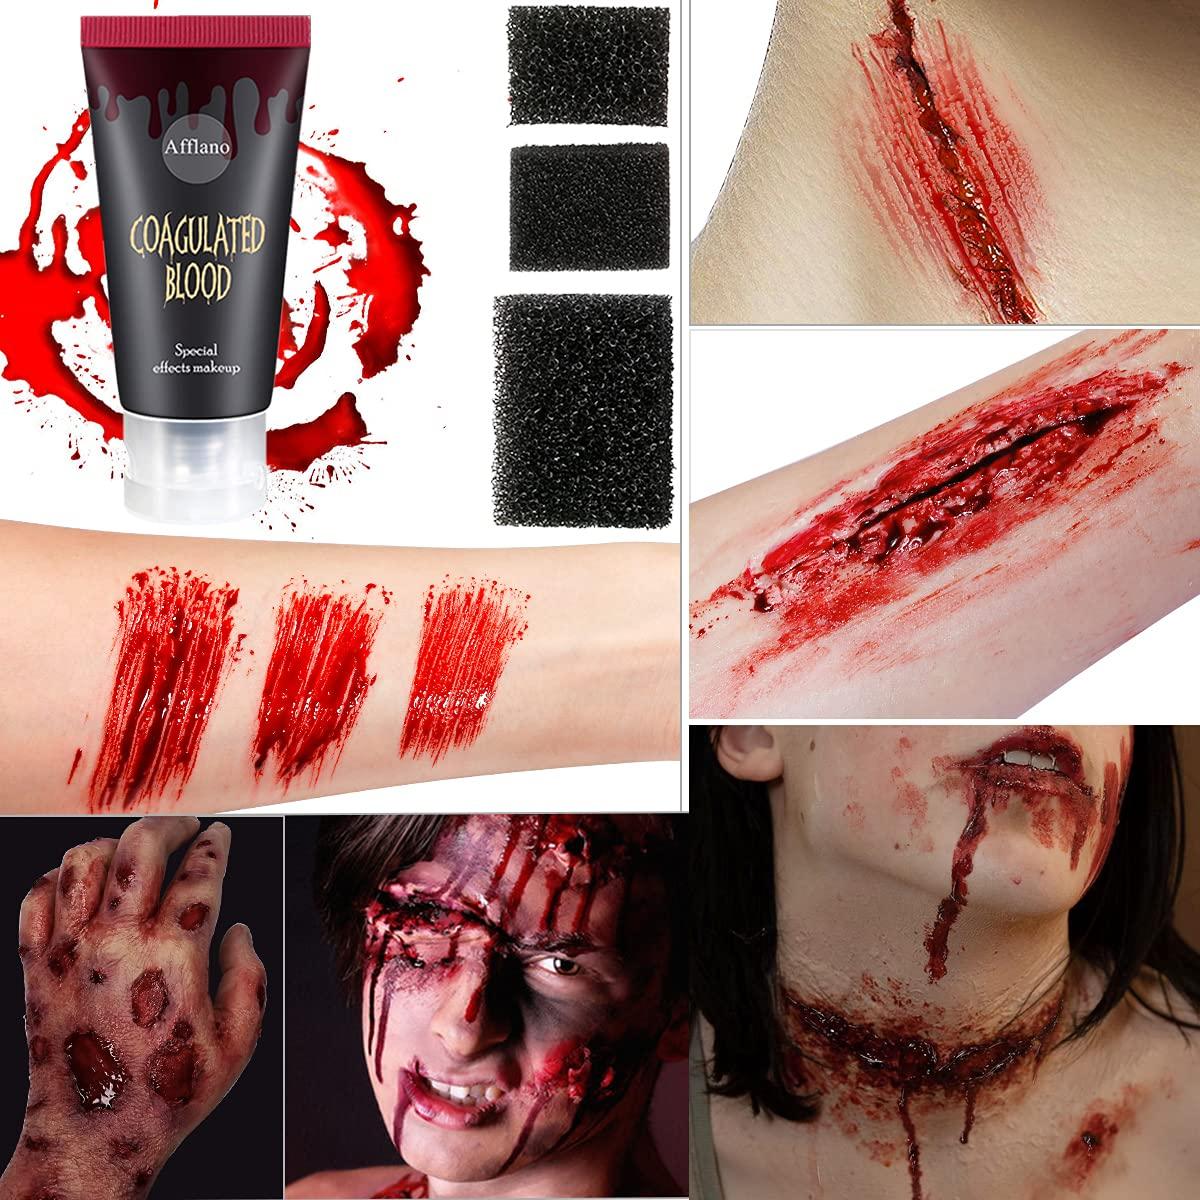 Special Effects FX Halloween Makeup Set,Afflano Nose & Scar Wax  60g+Coagulated Blood+Stipple Sponge*3+Spatula+Skin Wax Extension  Oil,Festival Stage